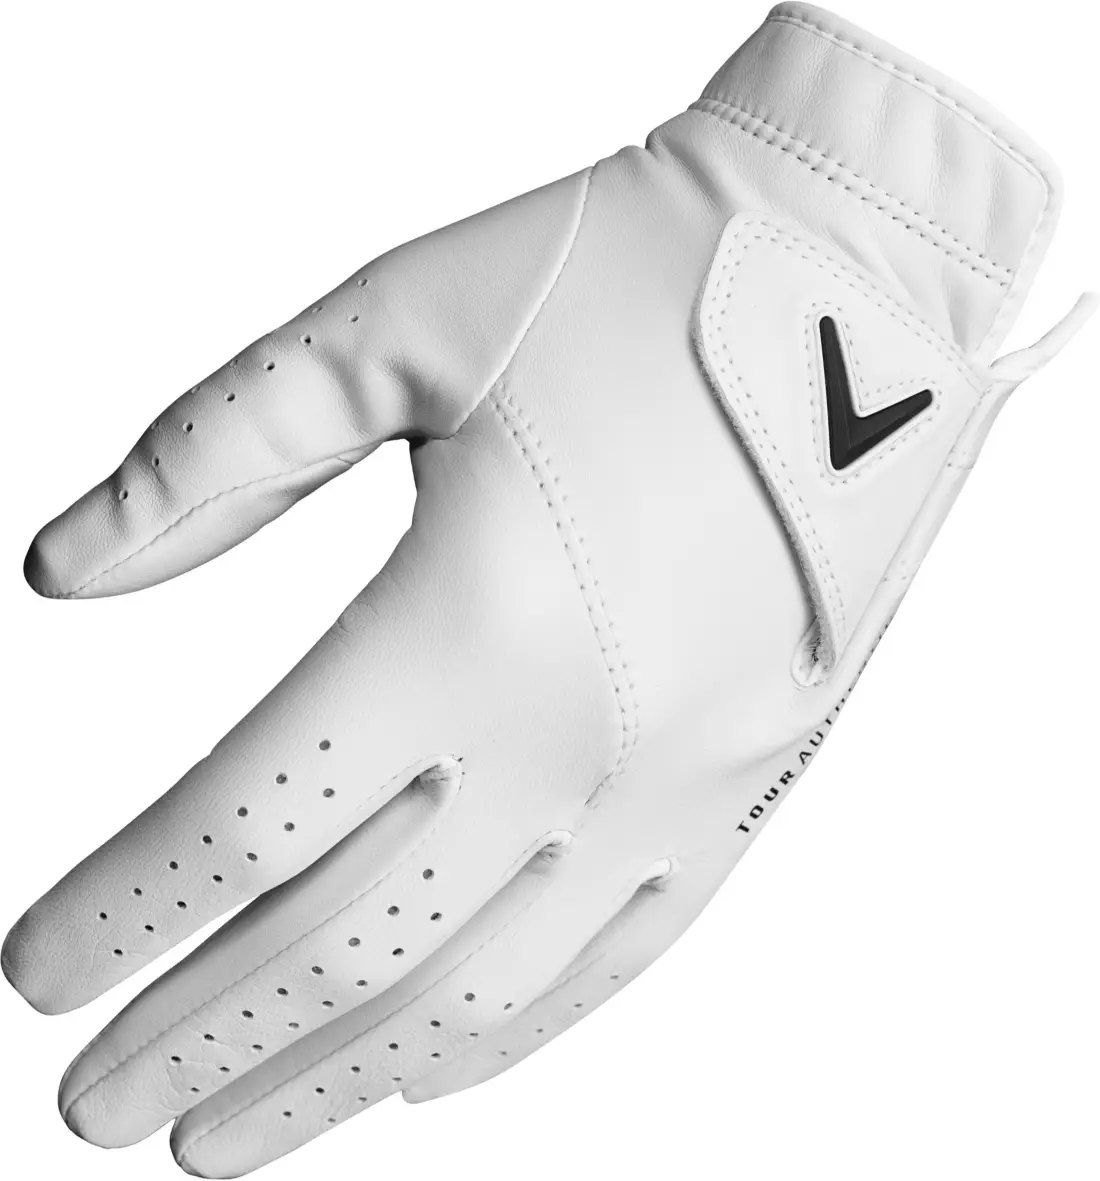 High-quality Golf Glove from Callaway brand, adjustable closure provides a breathable, secure fit, premium Cabretta leather infused with Griptac to create a 20% increase in grip tackiness